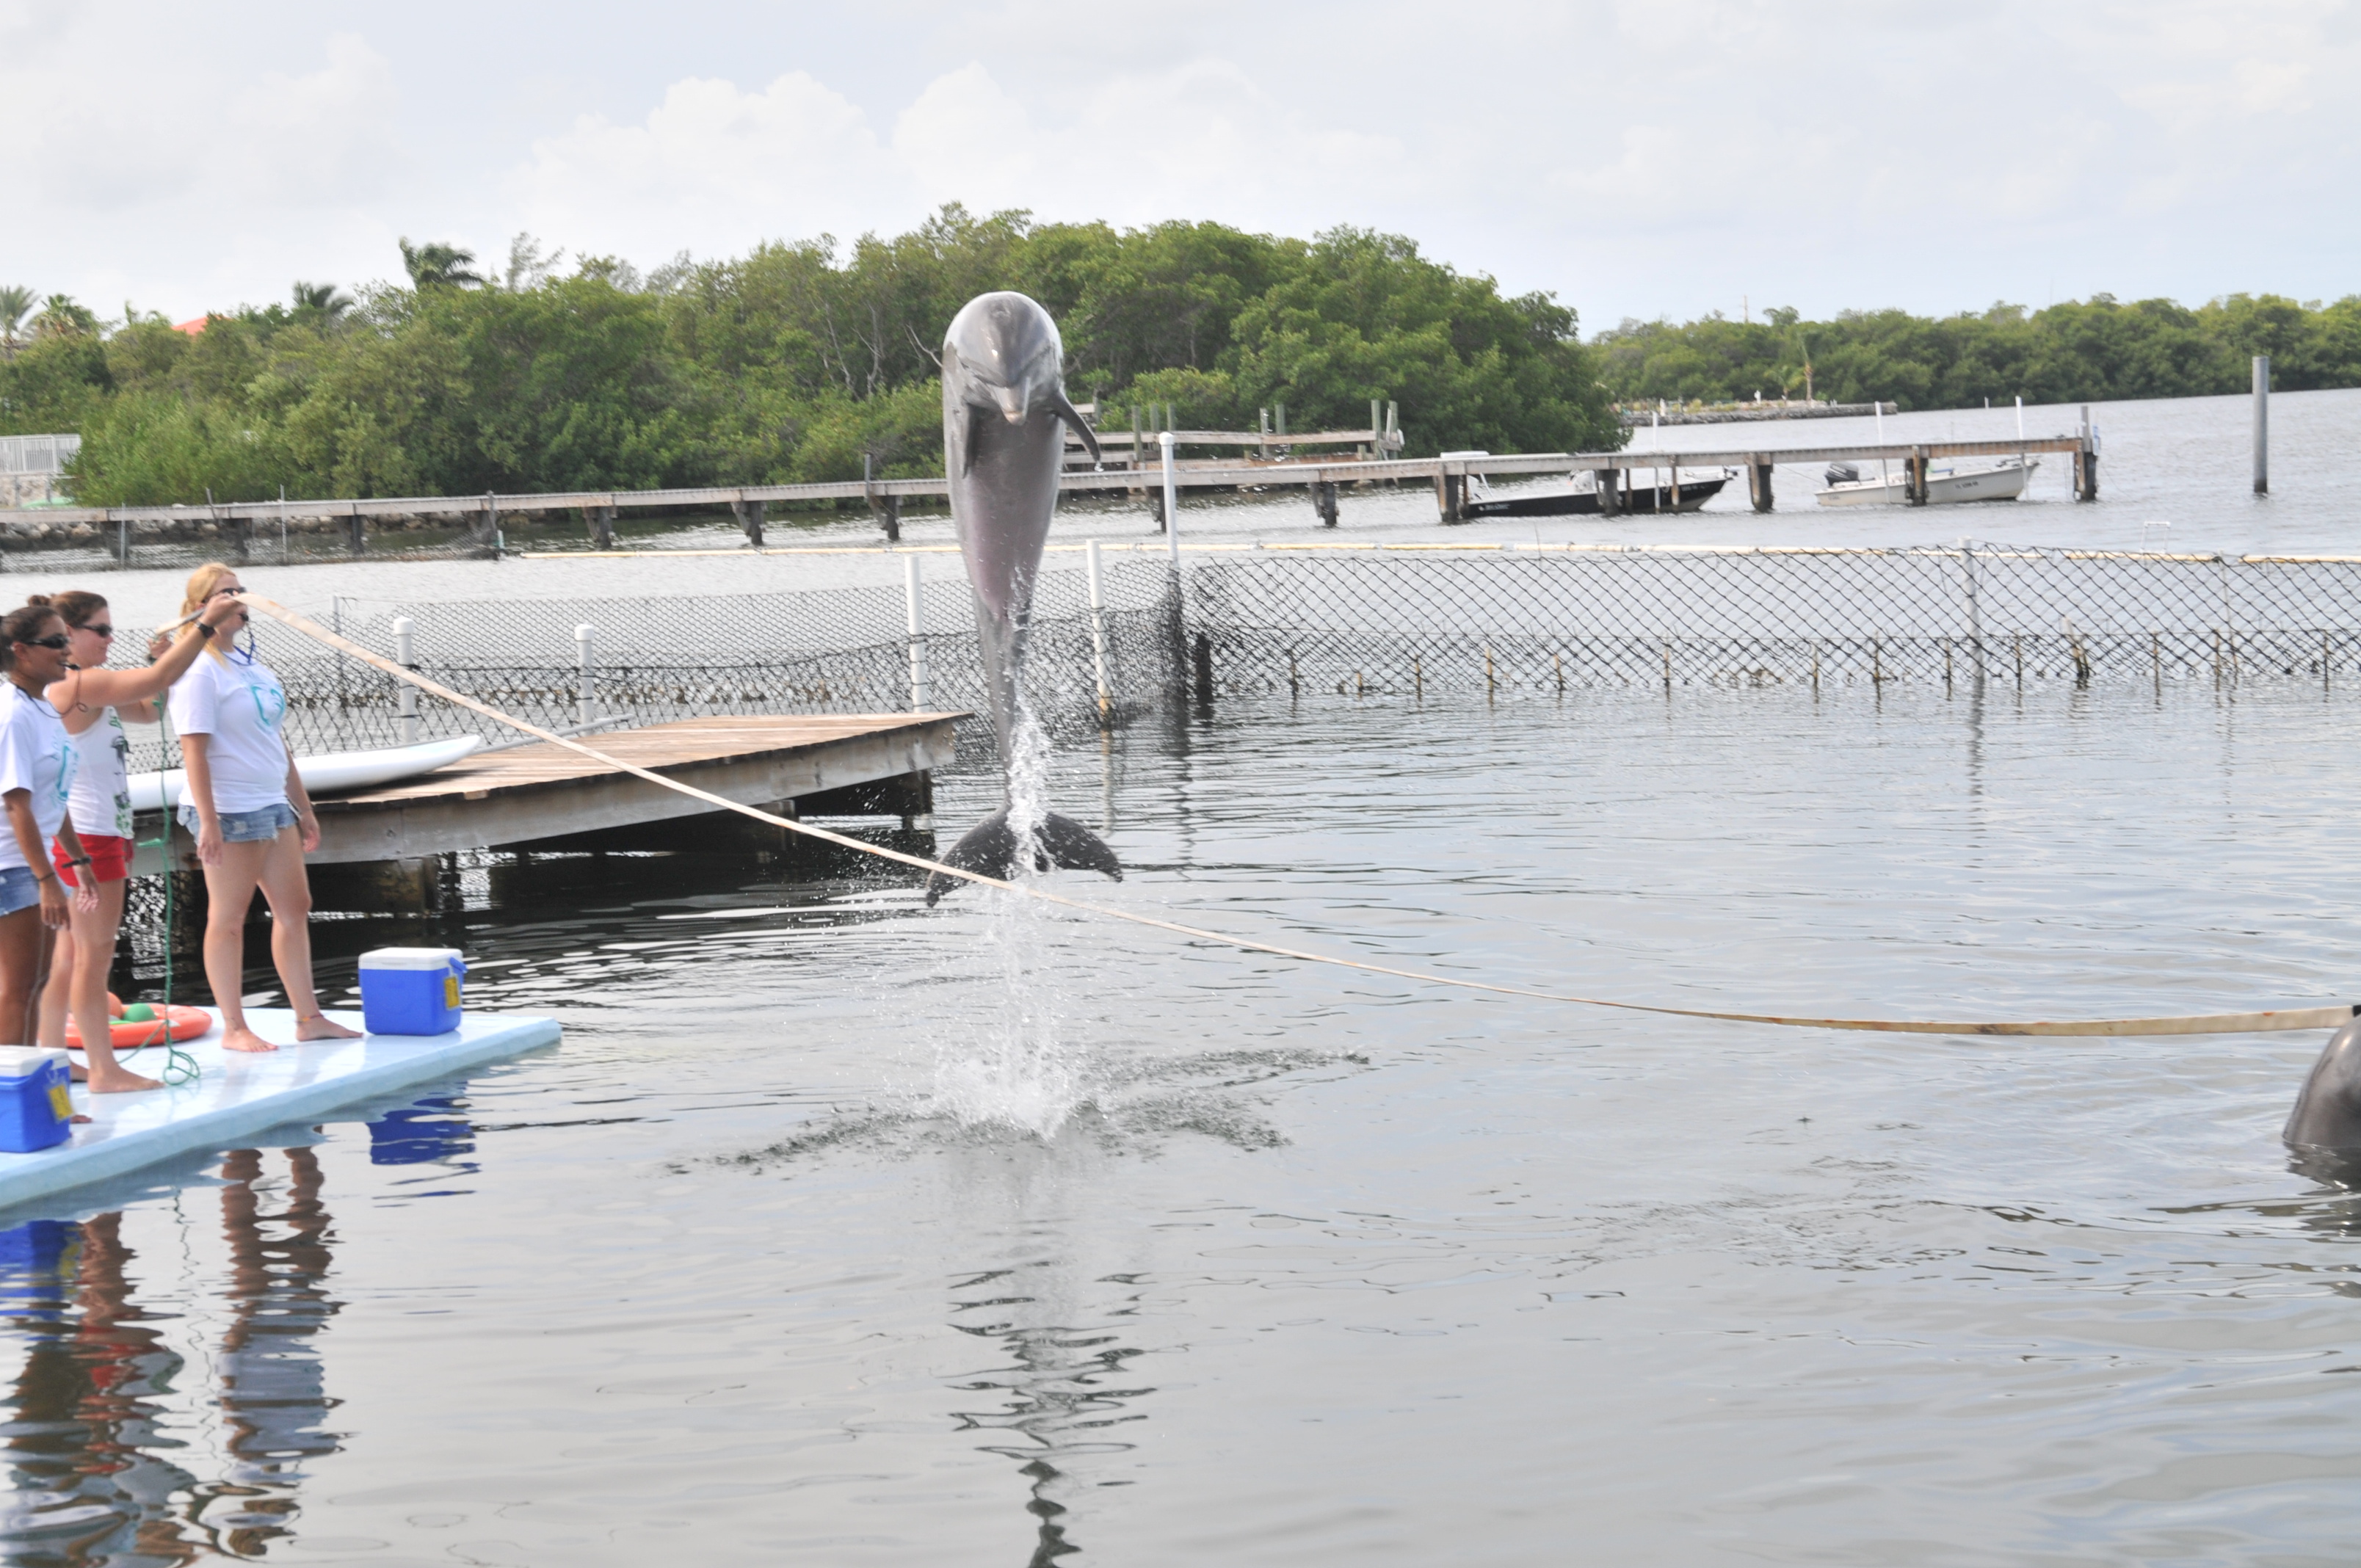 Our students spent one week in the Florida Keys, learning, playing, and swimming with dolphins.